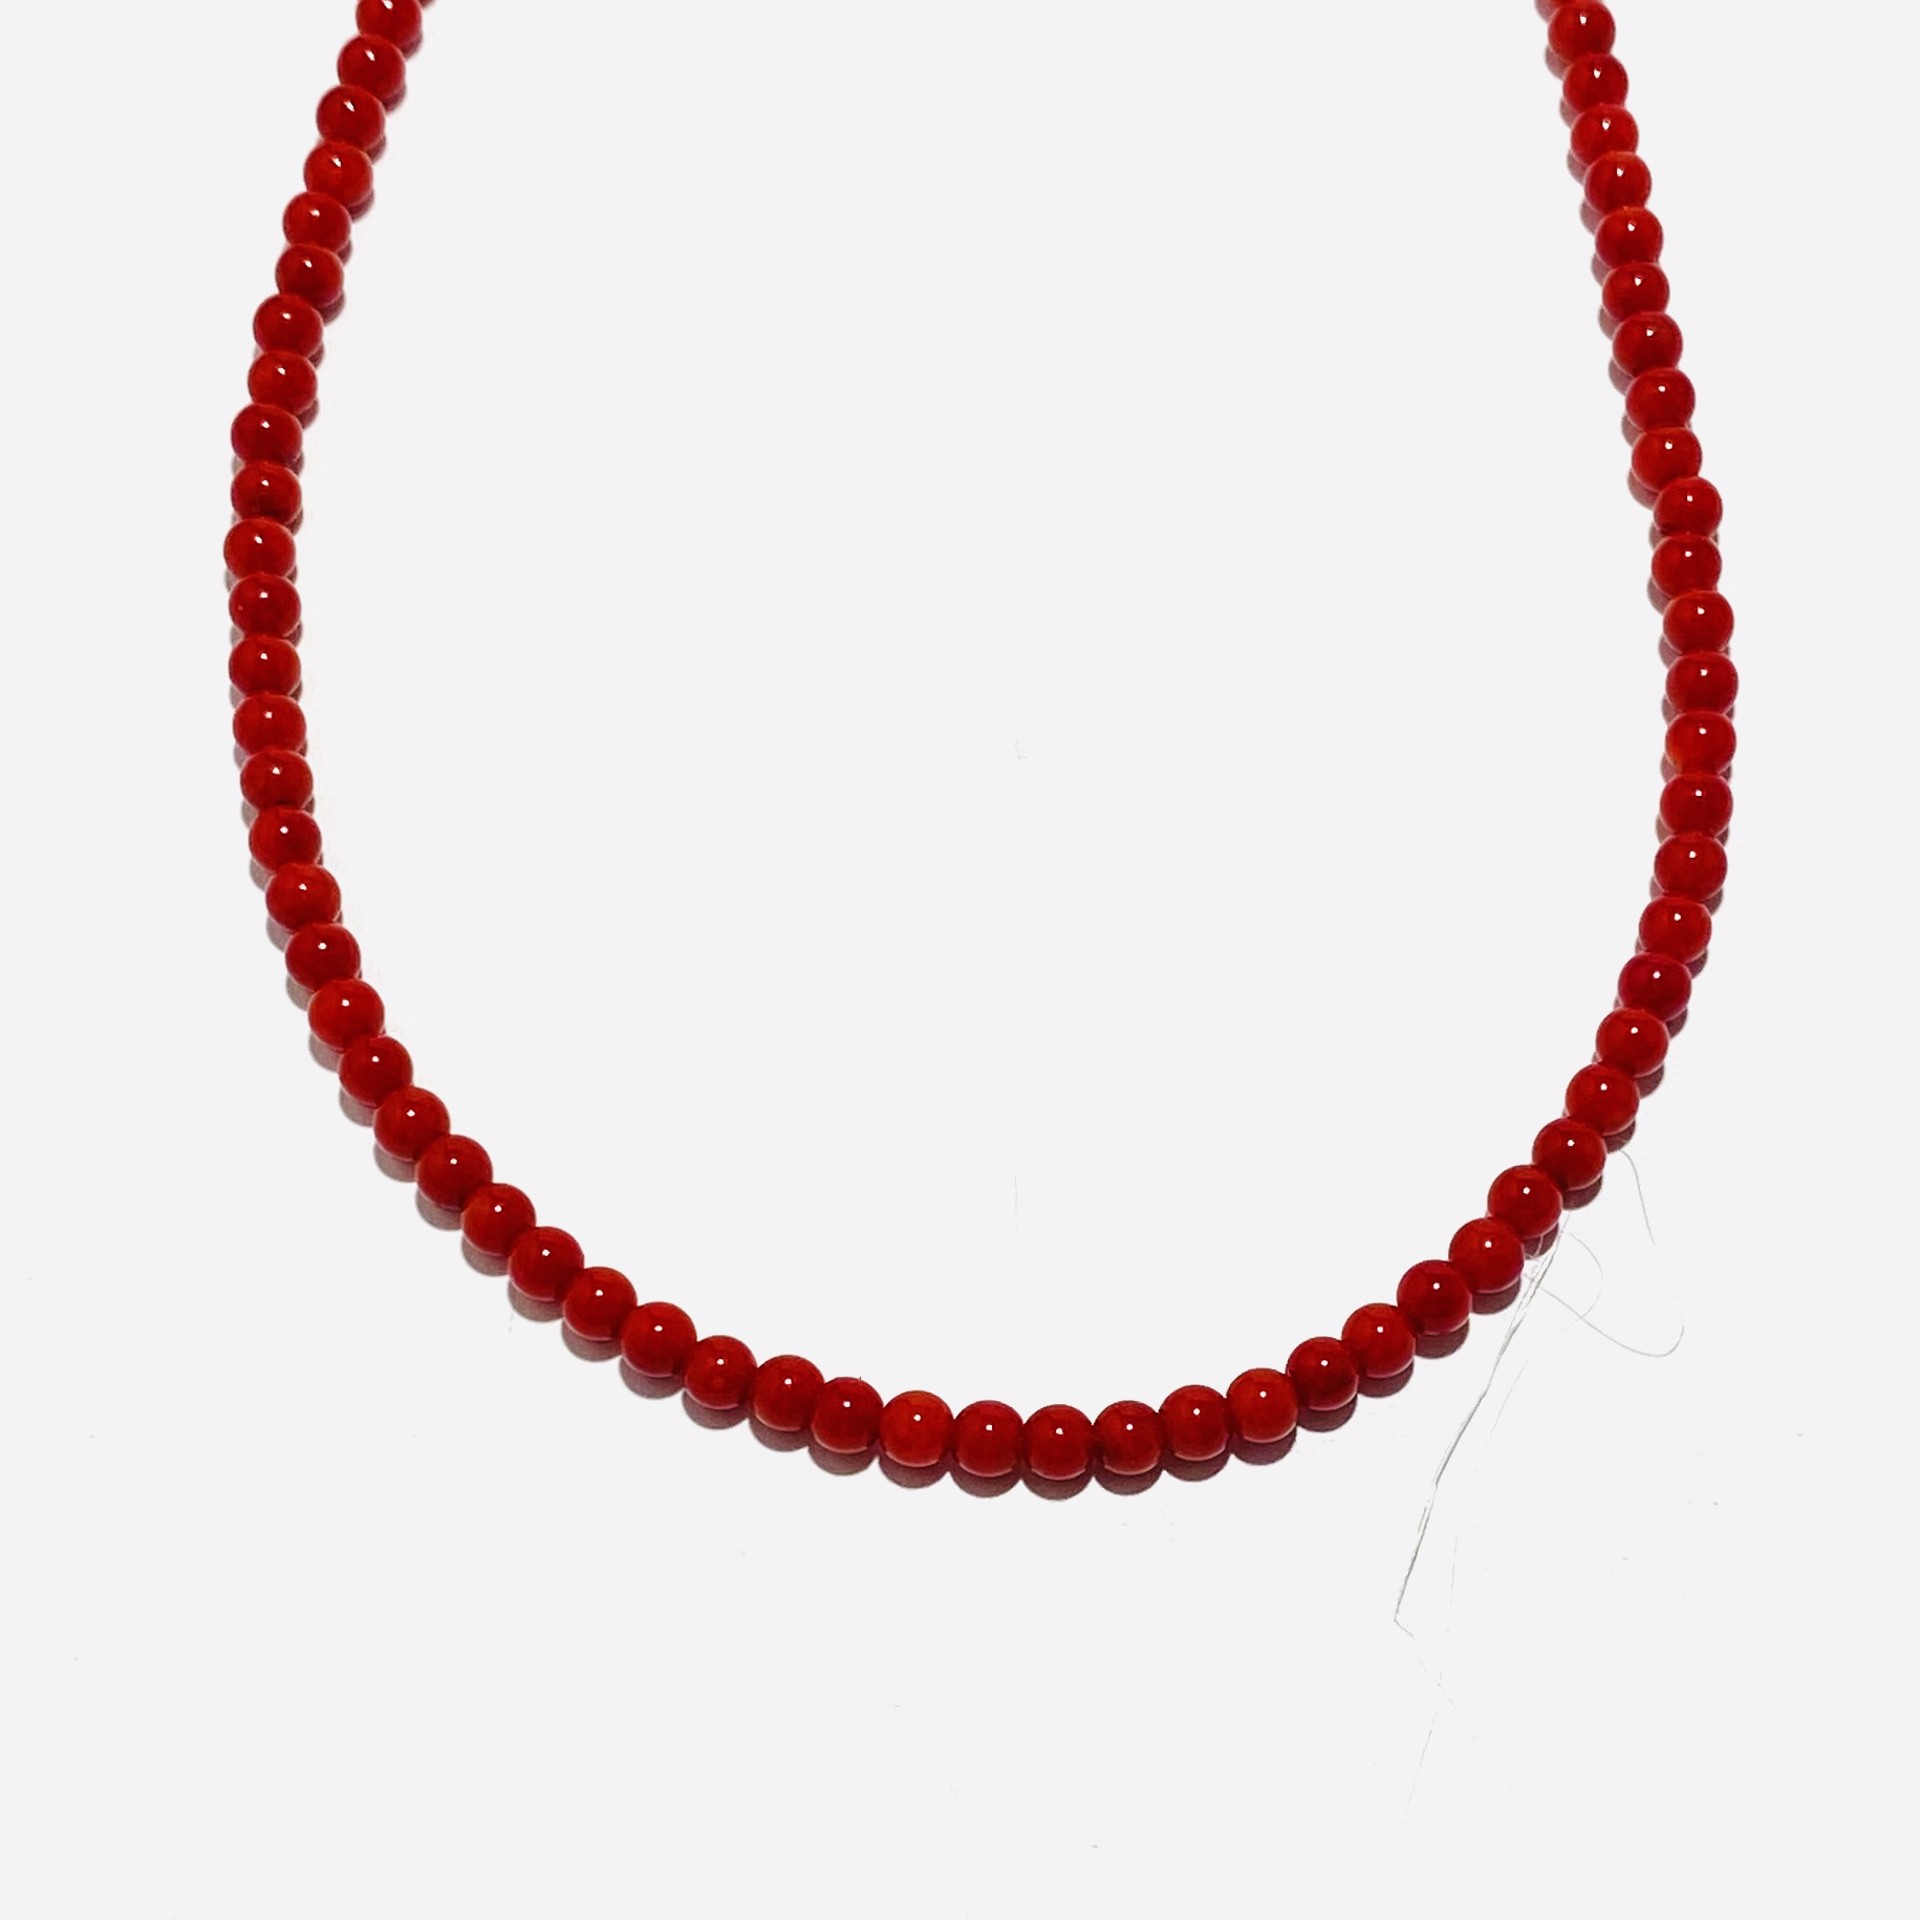 Red Coral Bead Strand Necklace by Nance Trueworthy